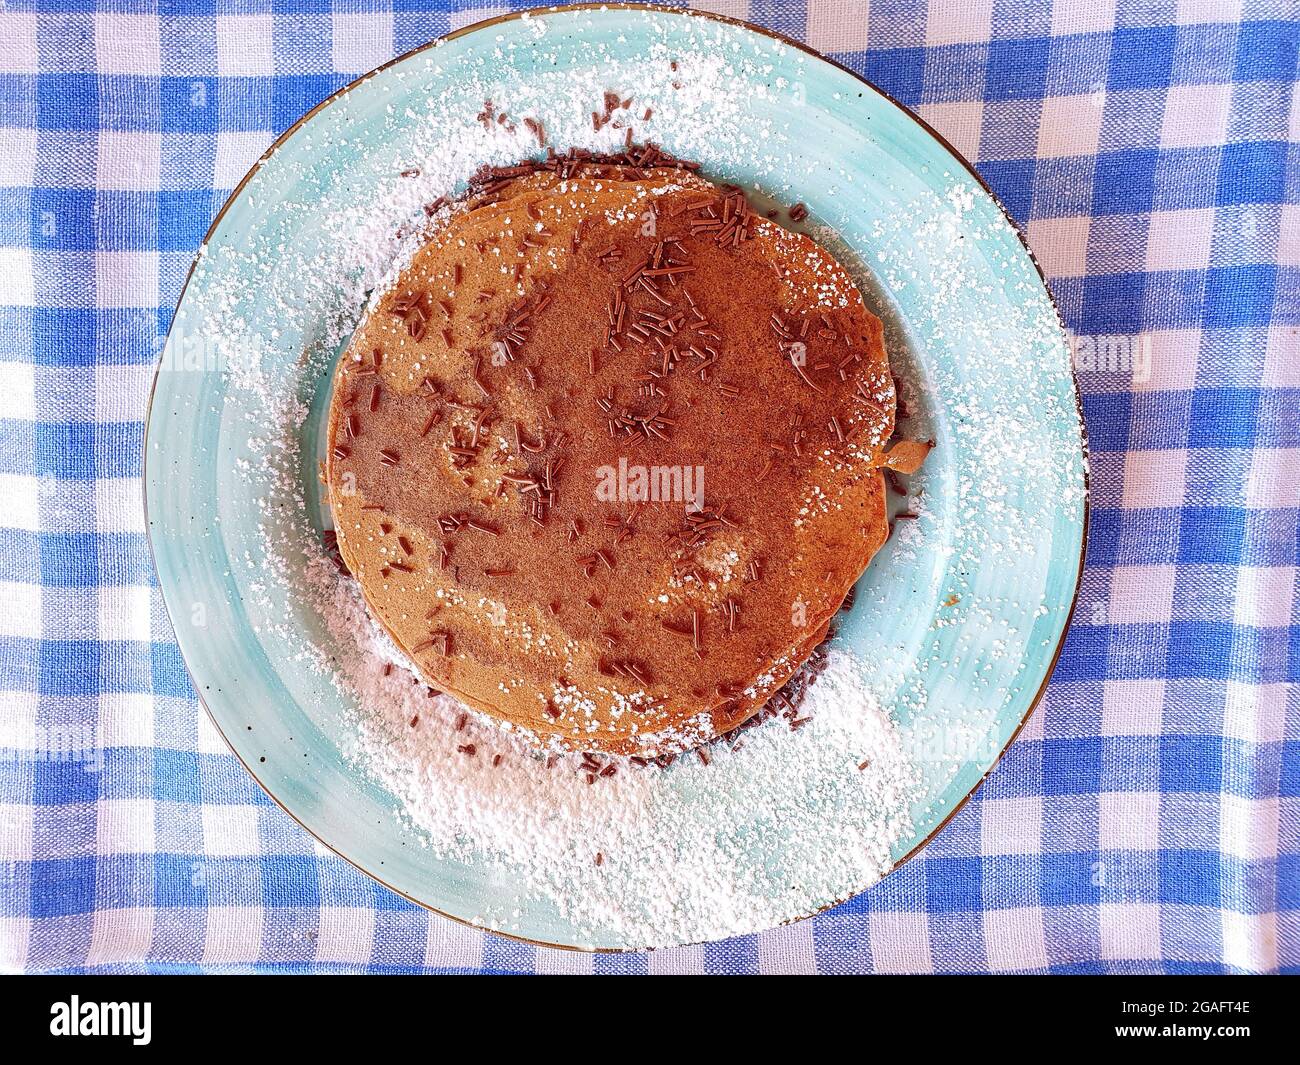 Chocolate pancakes on a blue plate. The pancakes are sprinkled with chocolate chips and powdered sugar. Stock Photo